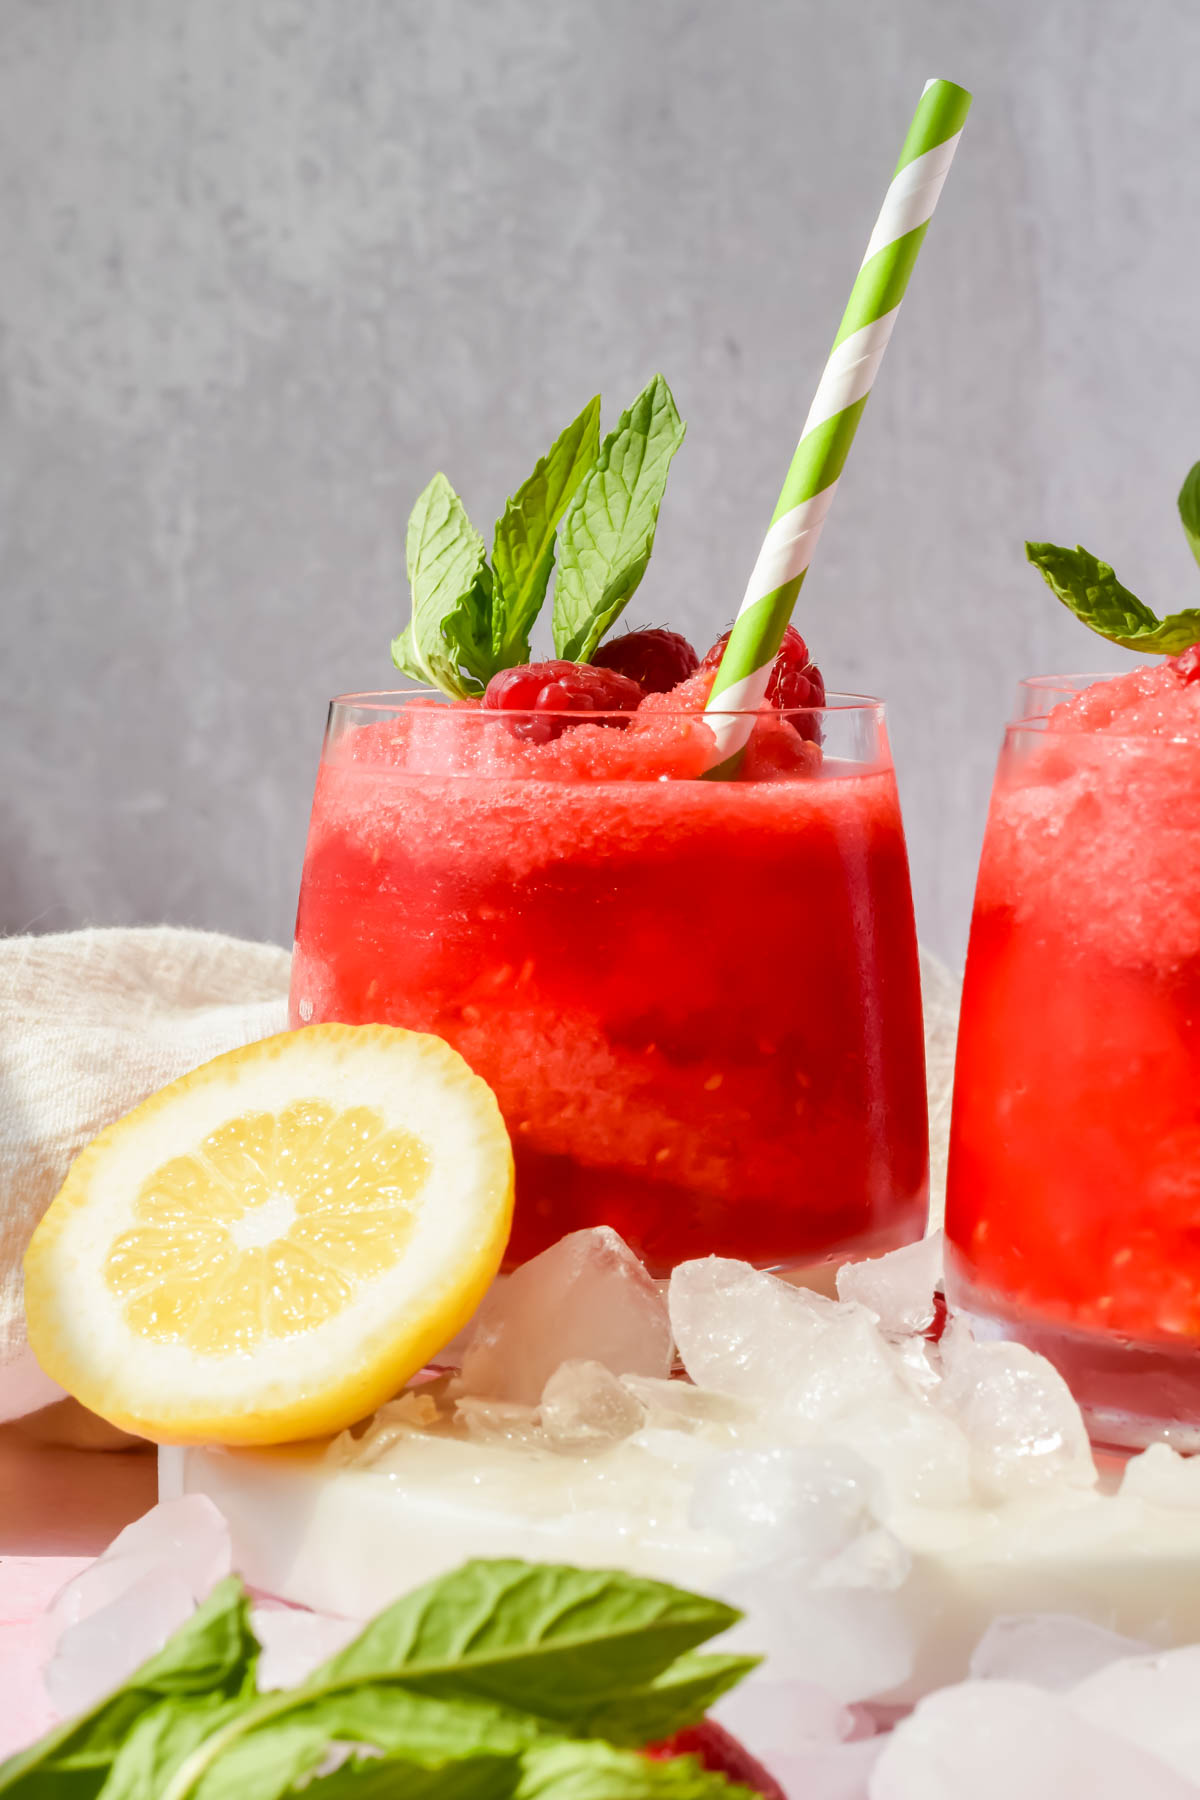 frozen raspberry lemonade refresher in glass garnished with fresh raspberries, mint leaves and straw.